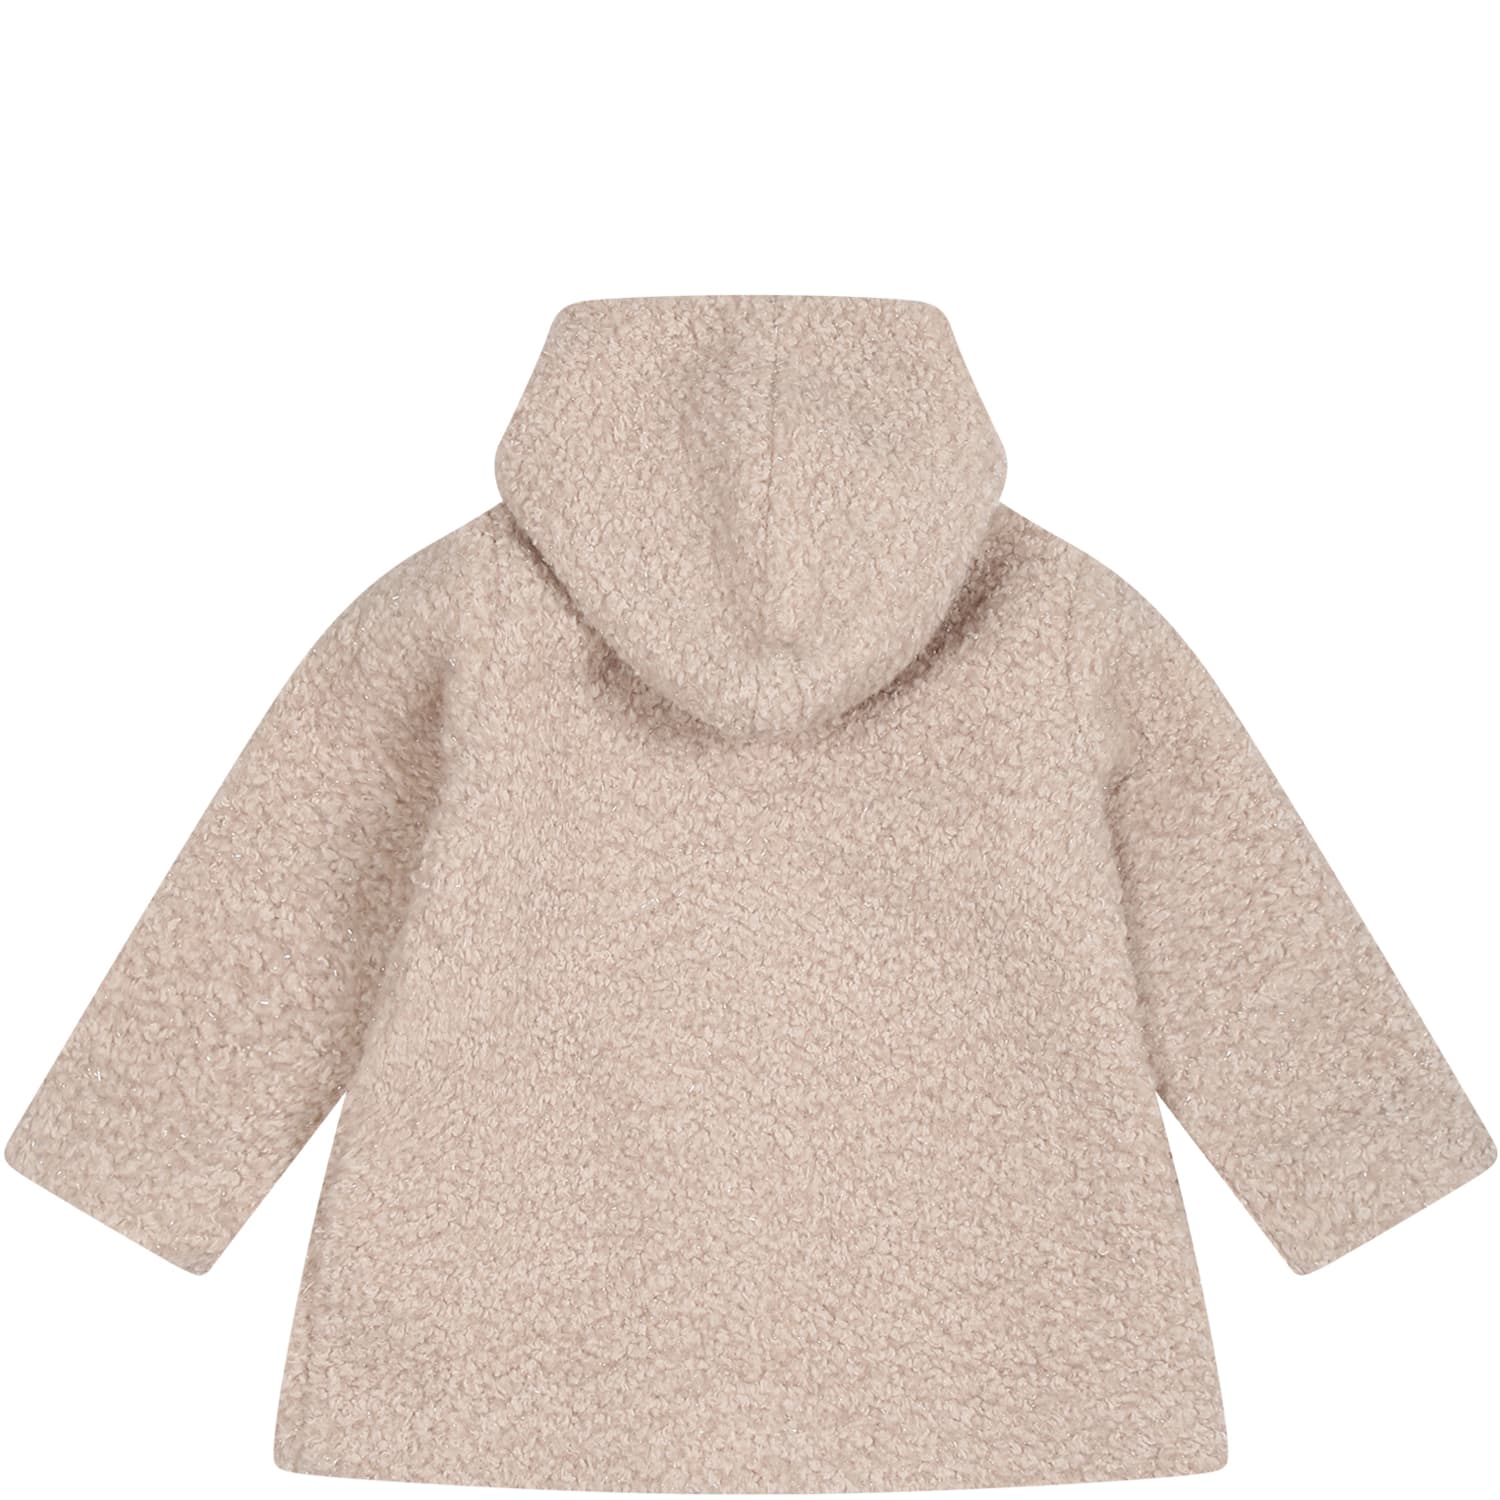 Shop Caffe' D'orzo Beige Coat For Baby Girl